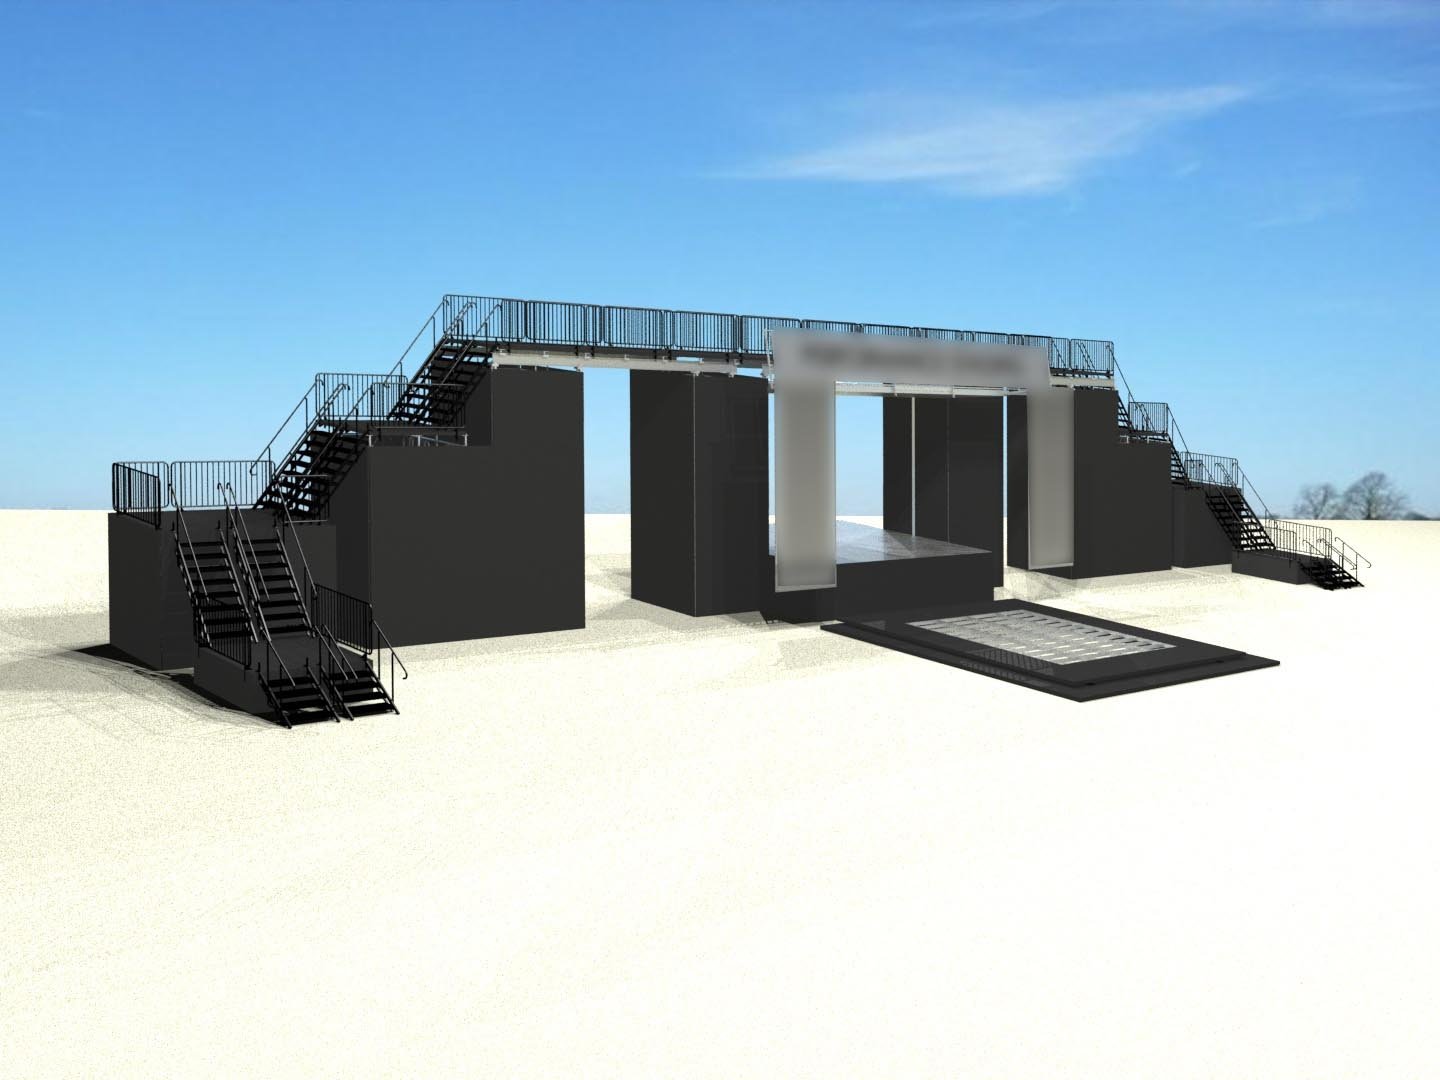 Mobile stage with platforms rising above and around